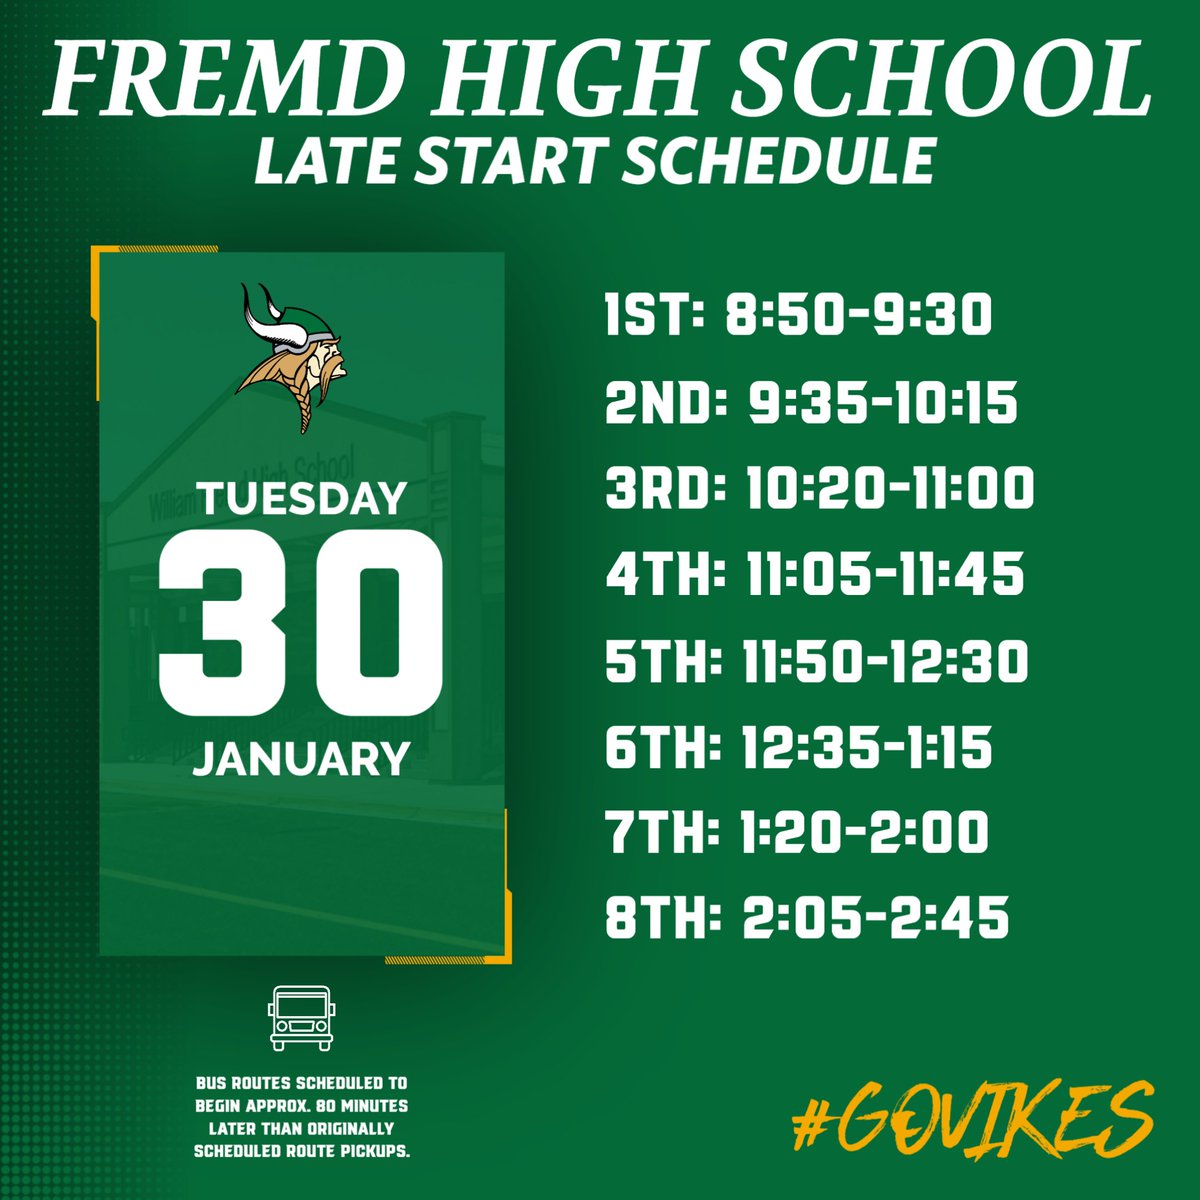 Fremd HS Late Start Schedule. Tuesday January 30. 1st : 8:50 - 9:30. 2nd: 9:35 - 10:15. 3rd 10:20 - 11:00. 4th 11:05 - 11:45. 5th: 11:50 - 12:30. 6th 12:35 - 1:15. 7th 1:20 - 2:00. 8th 2:05 - 2:45.